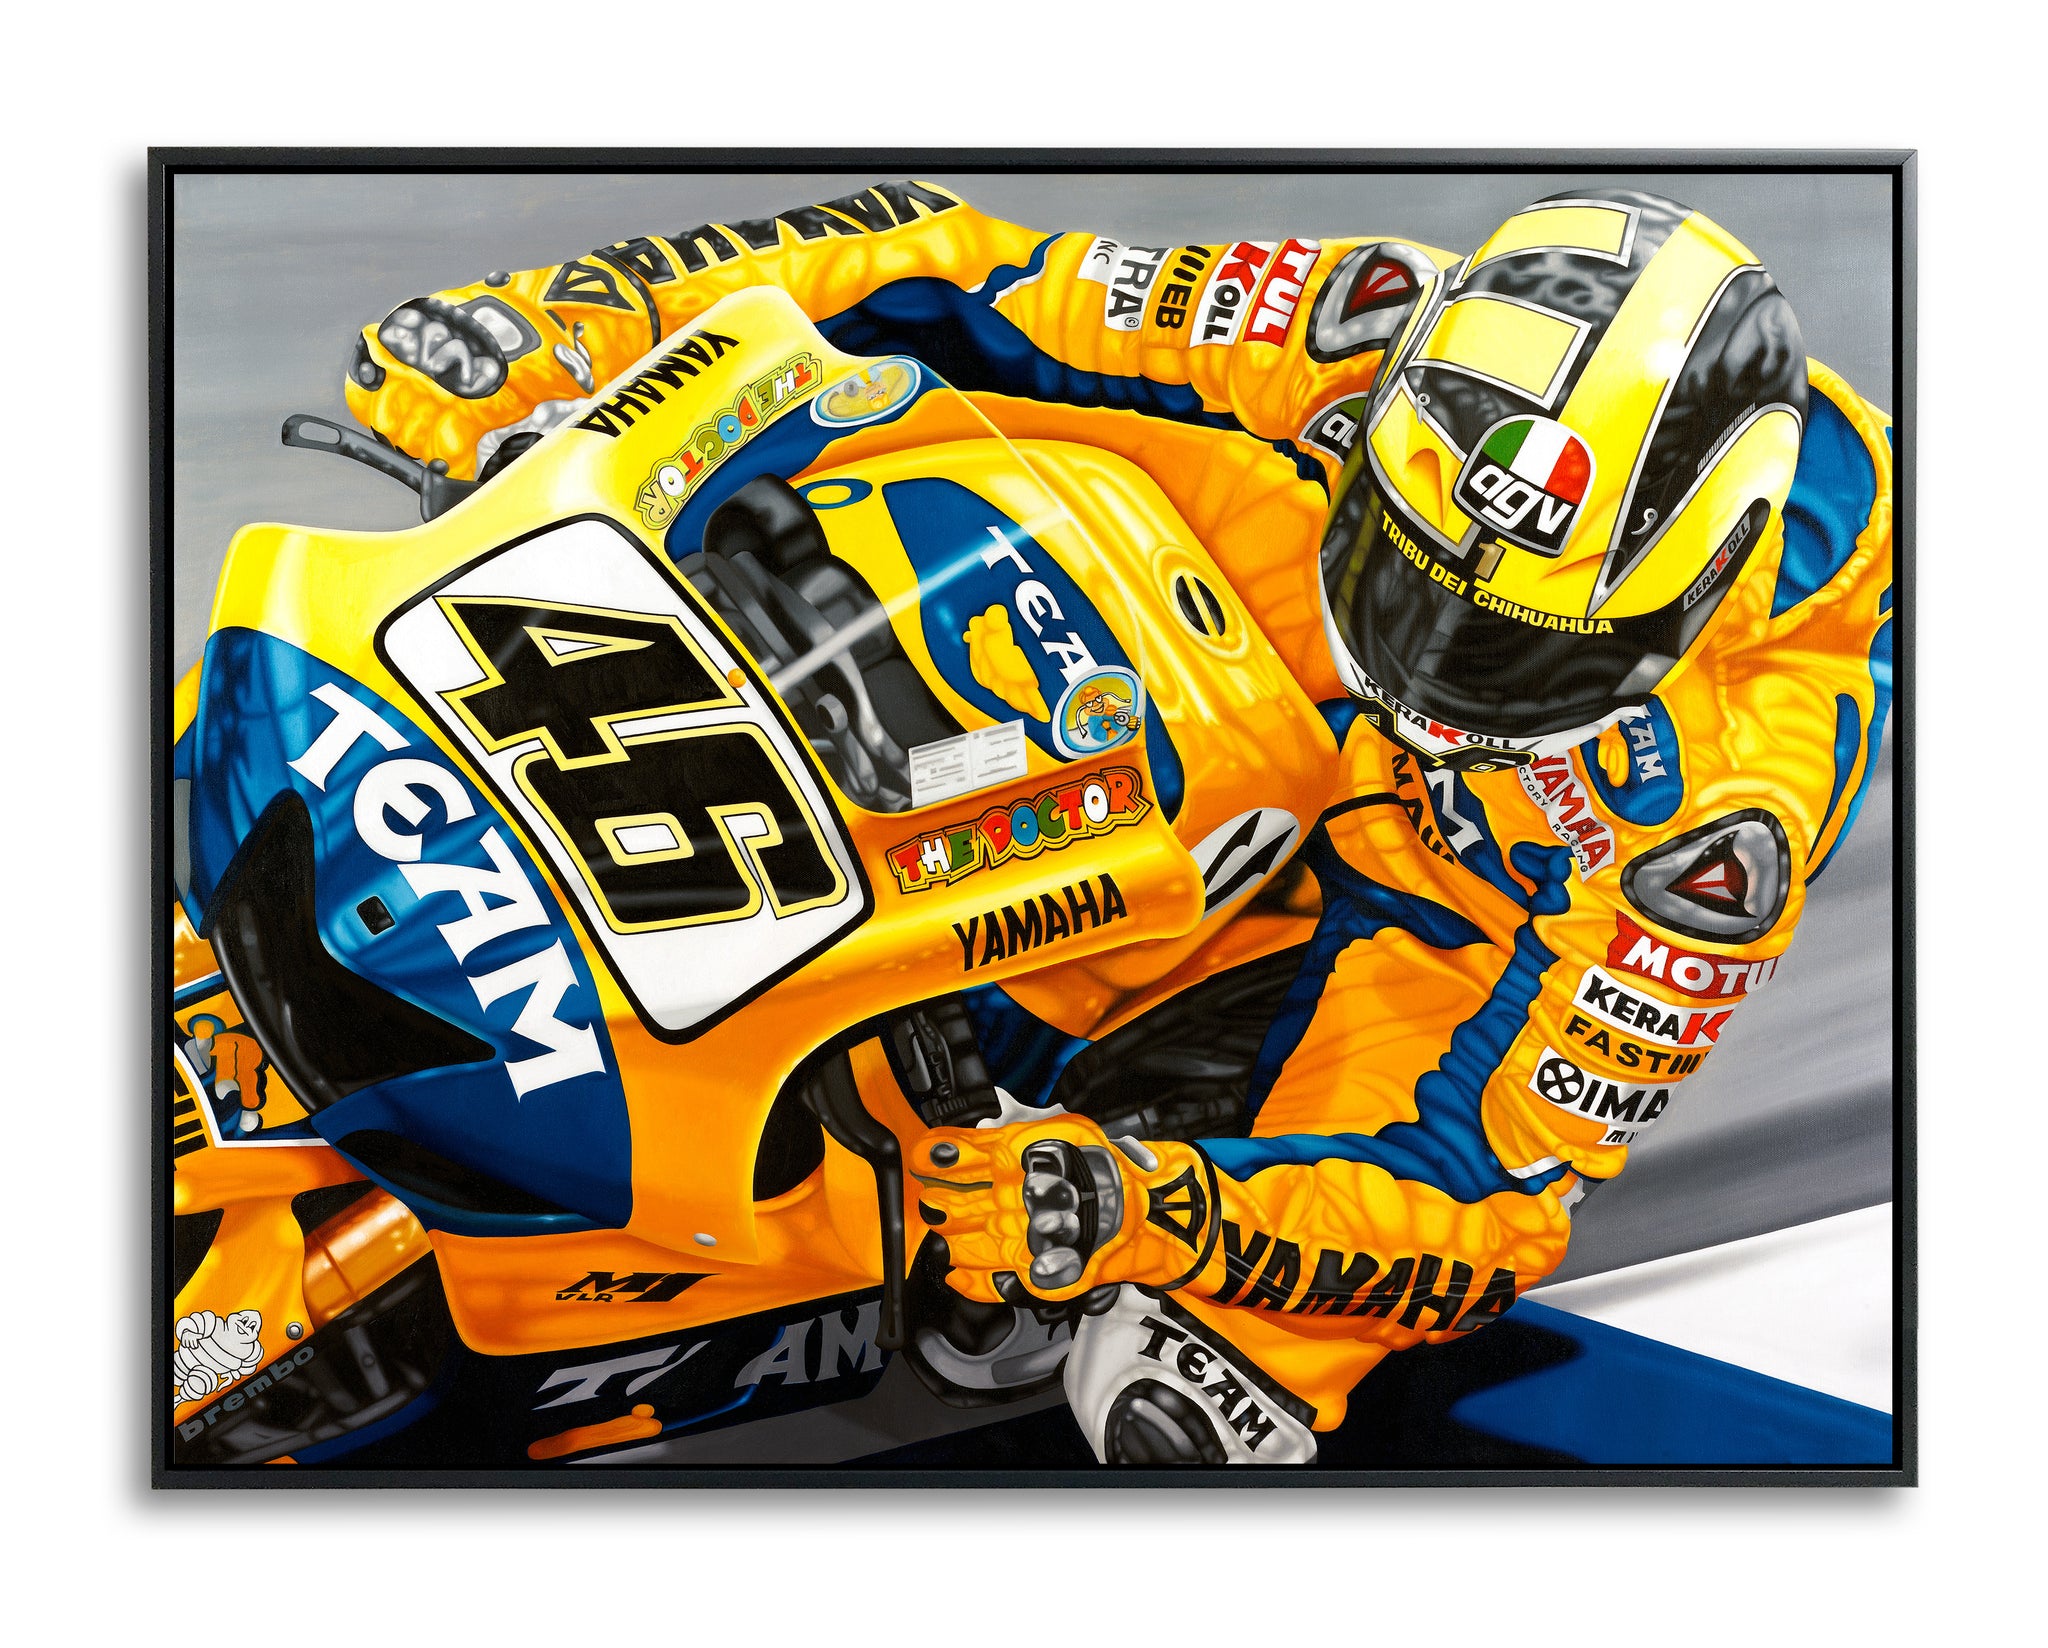 Valentino Rossi, The Peoples Champion by Colin Carter